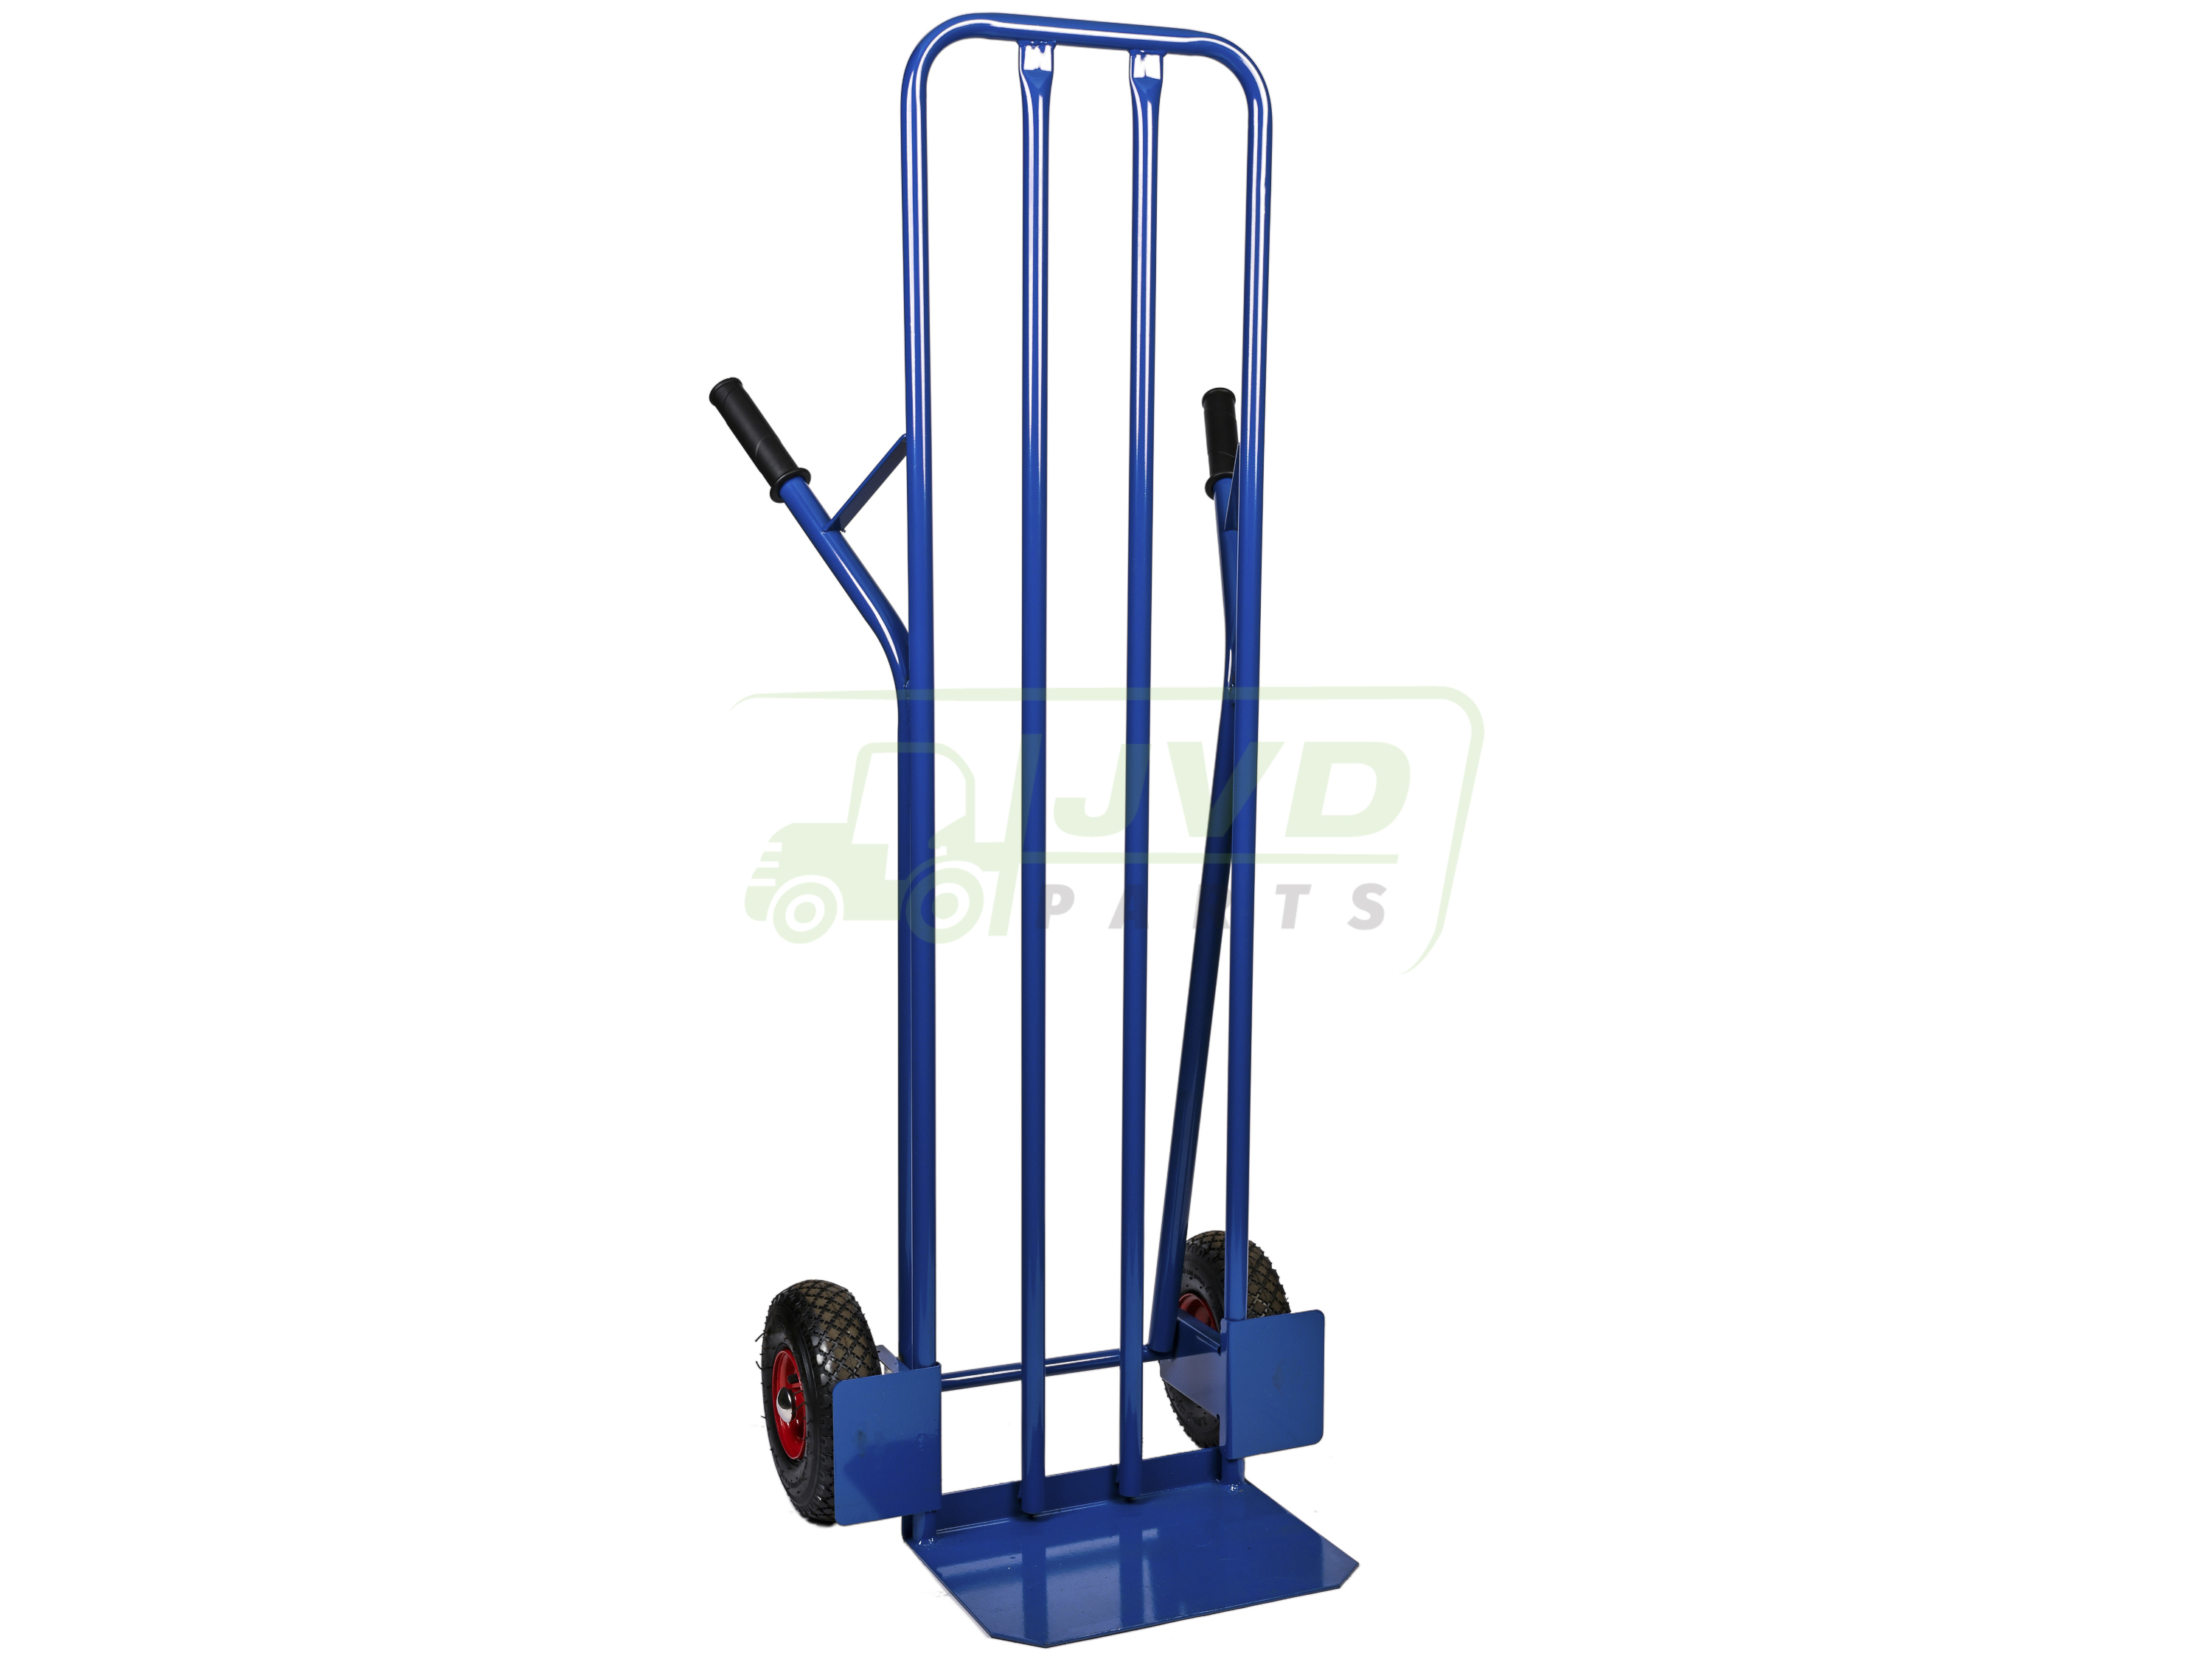 Handtrolley, Height 1500mm - Plate (400x300mm)